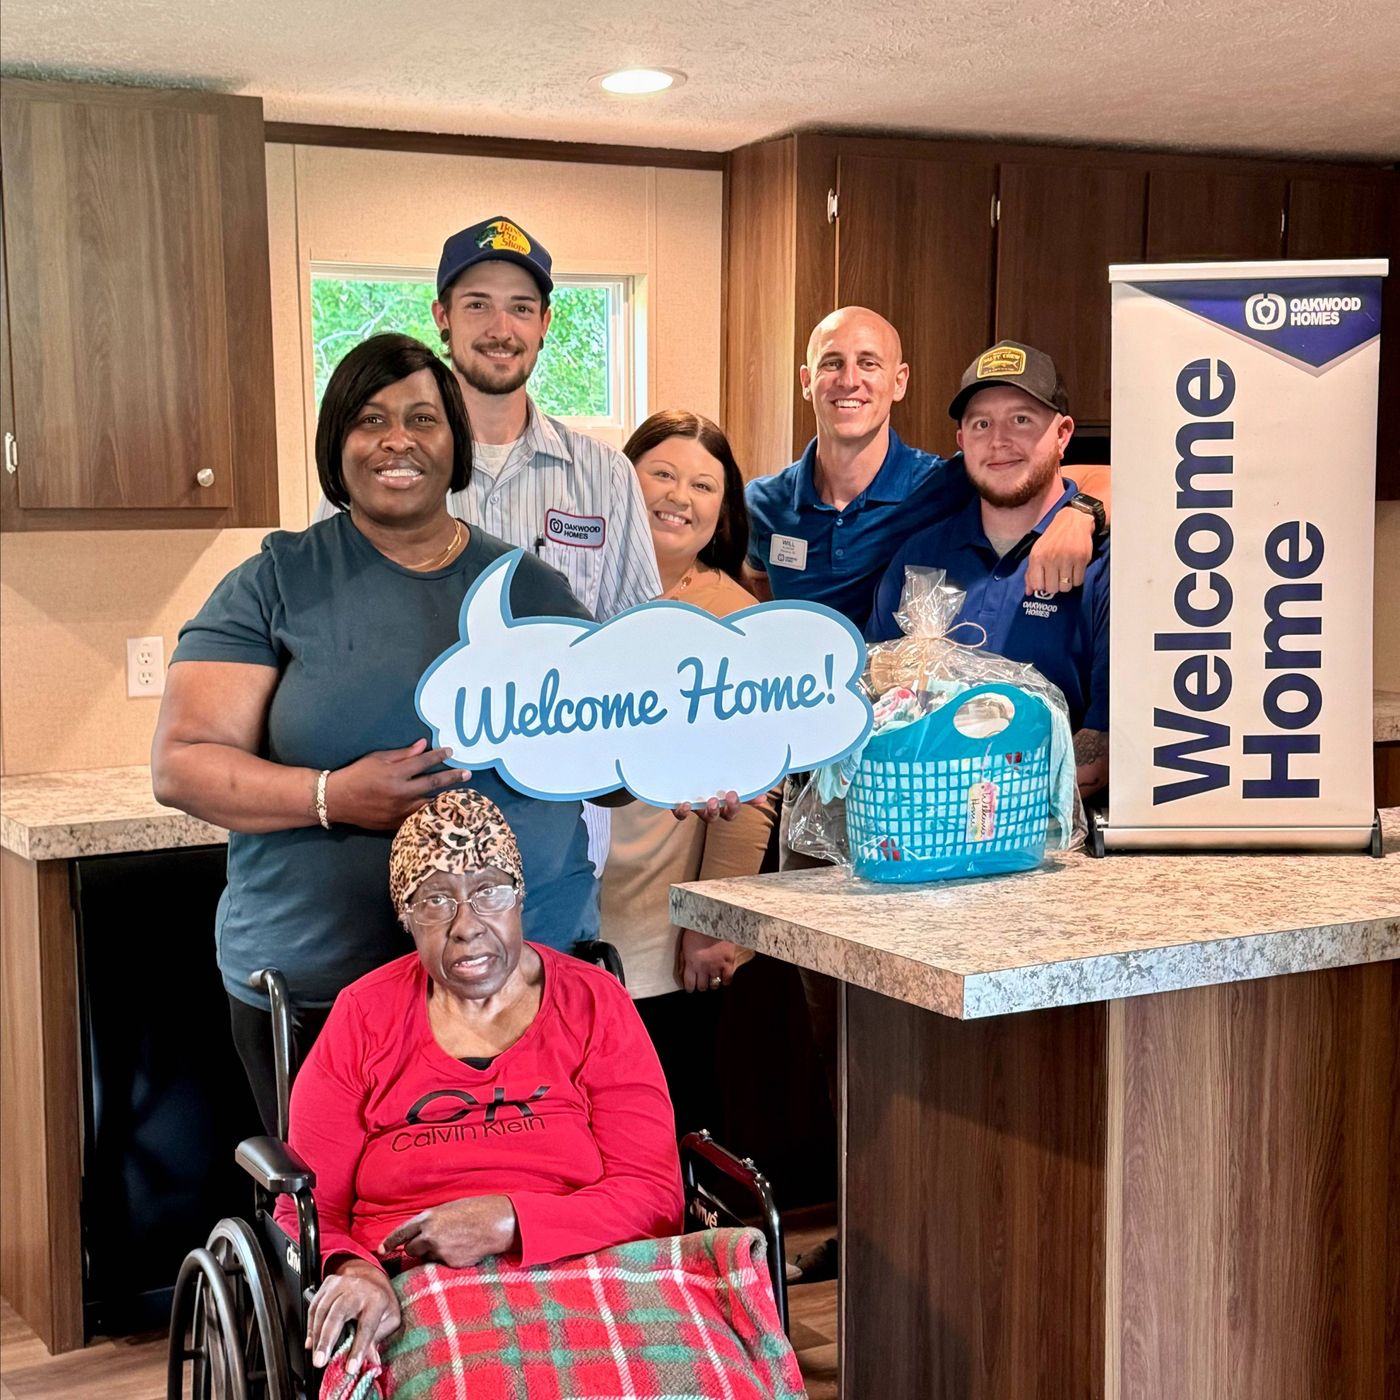 Beatrice G. welcome home image